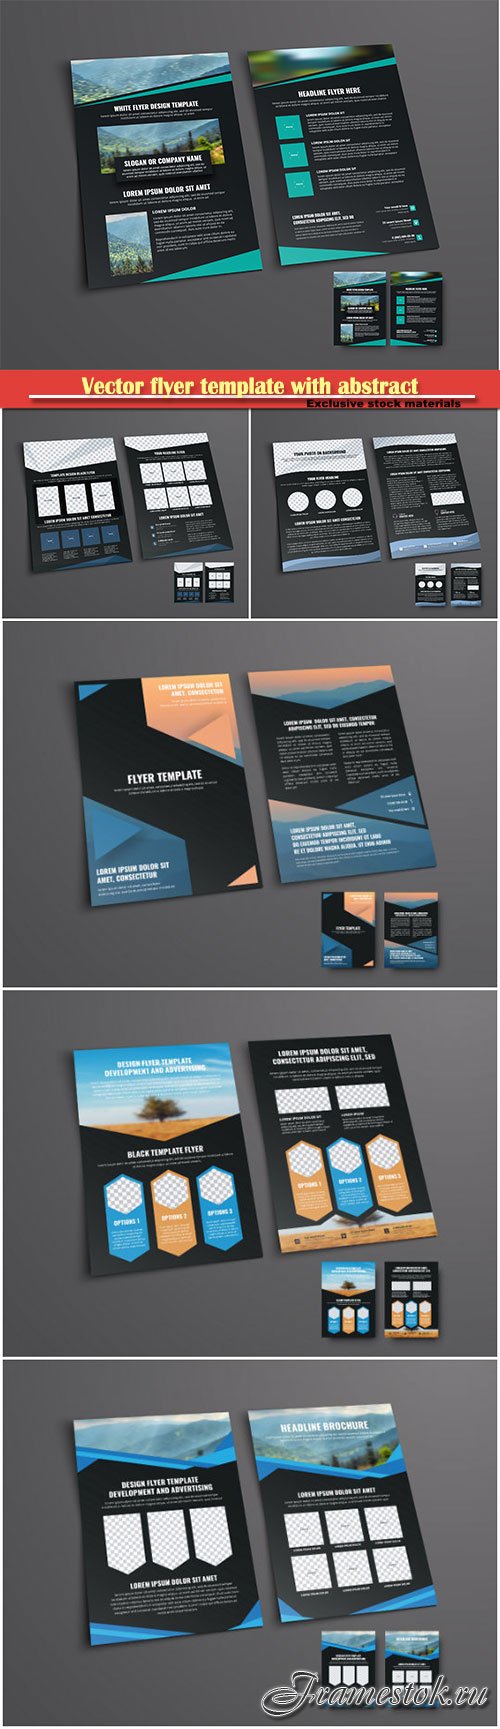 Vector flyer template with abstract geometric shapes for a photo